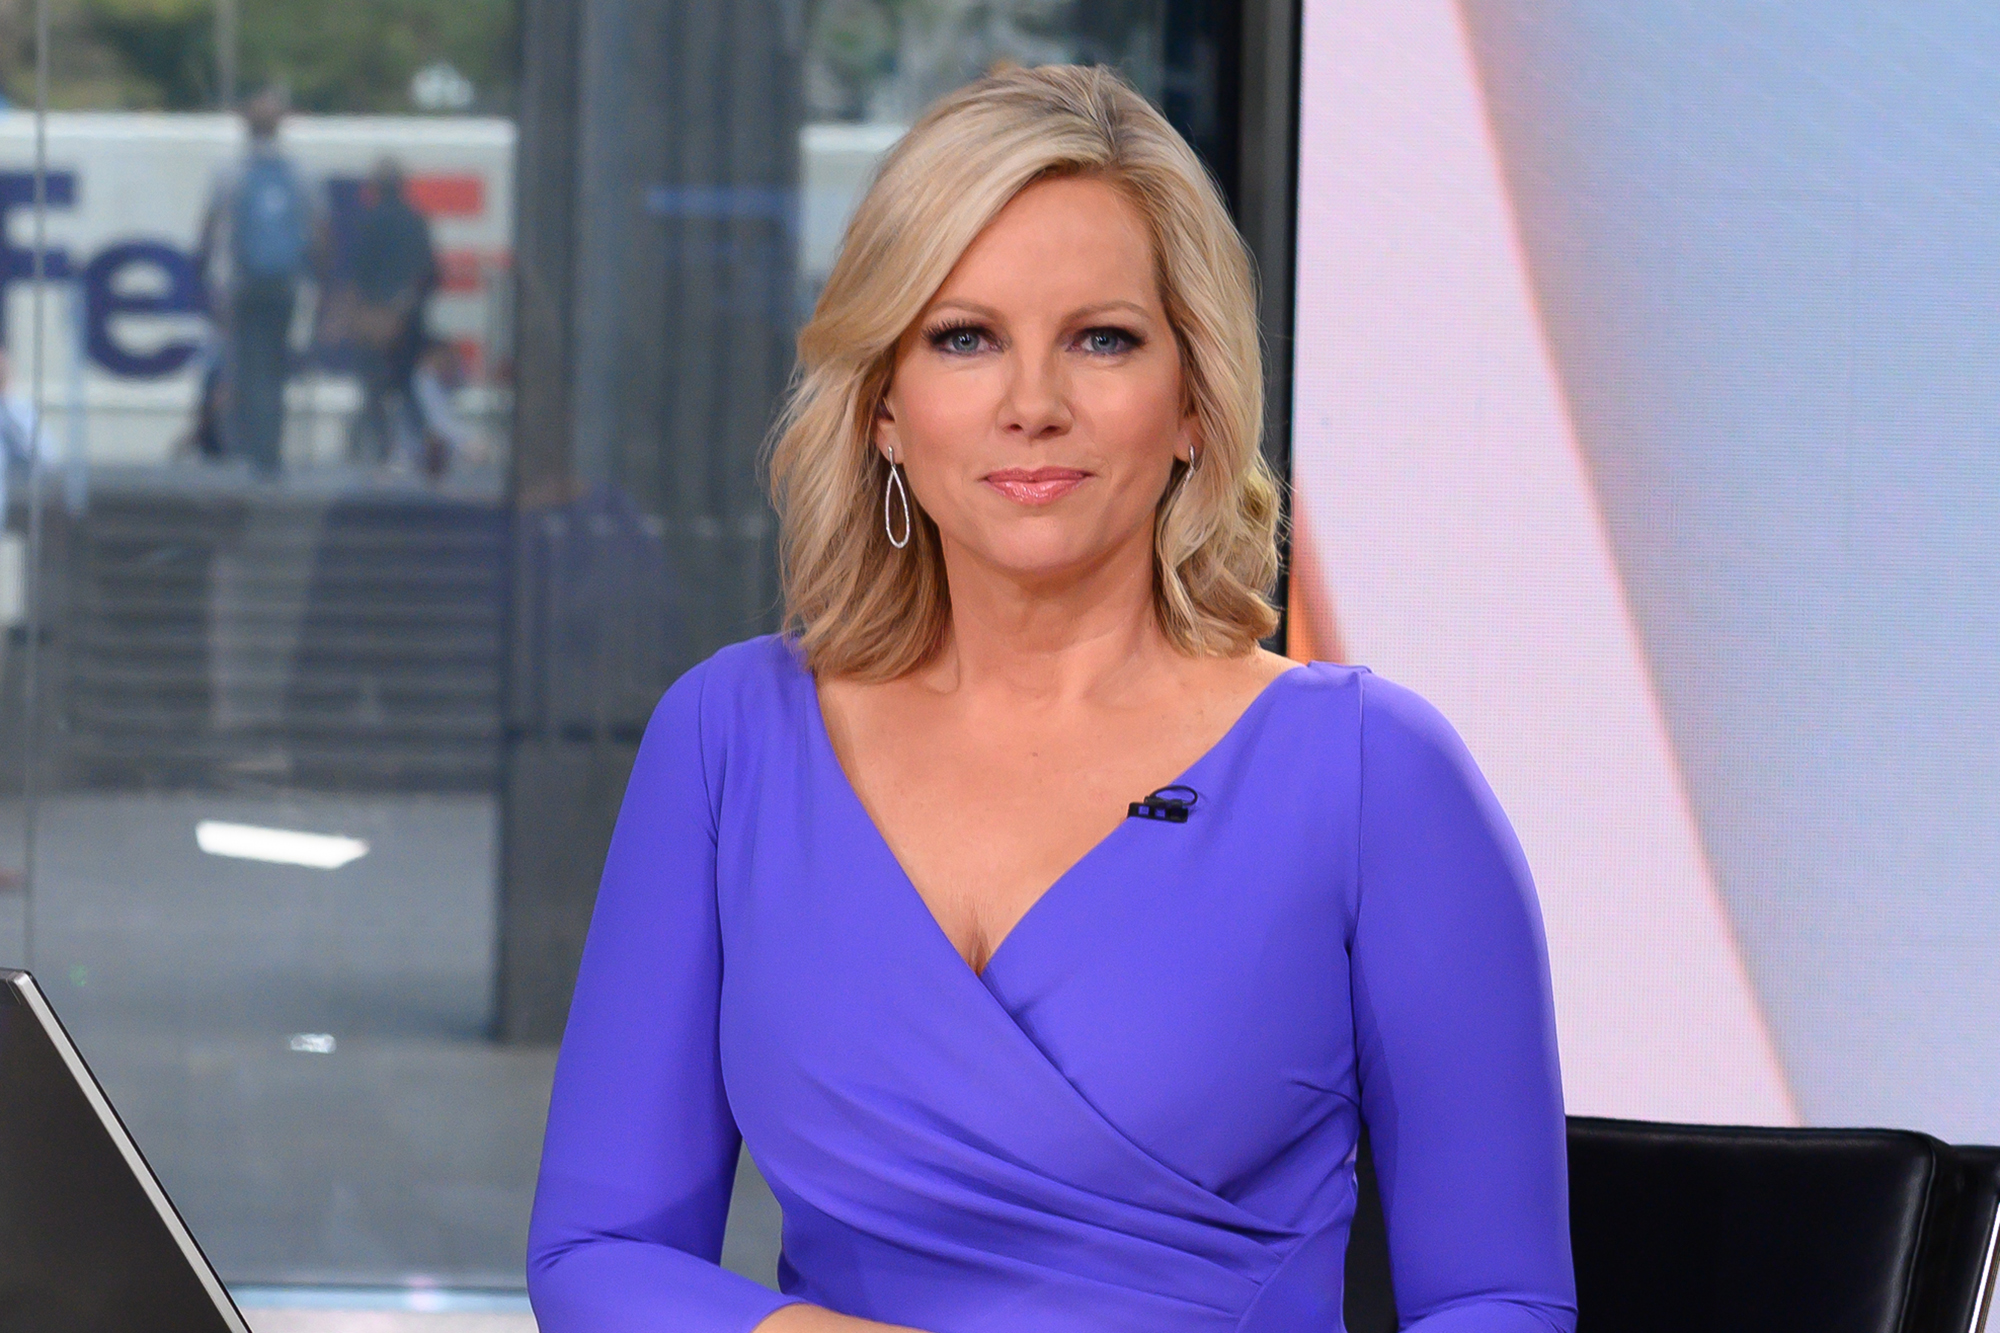 shannon bream hot pictures